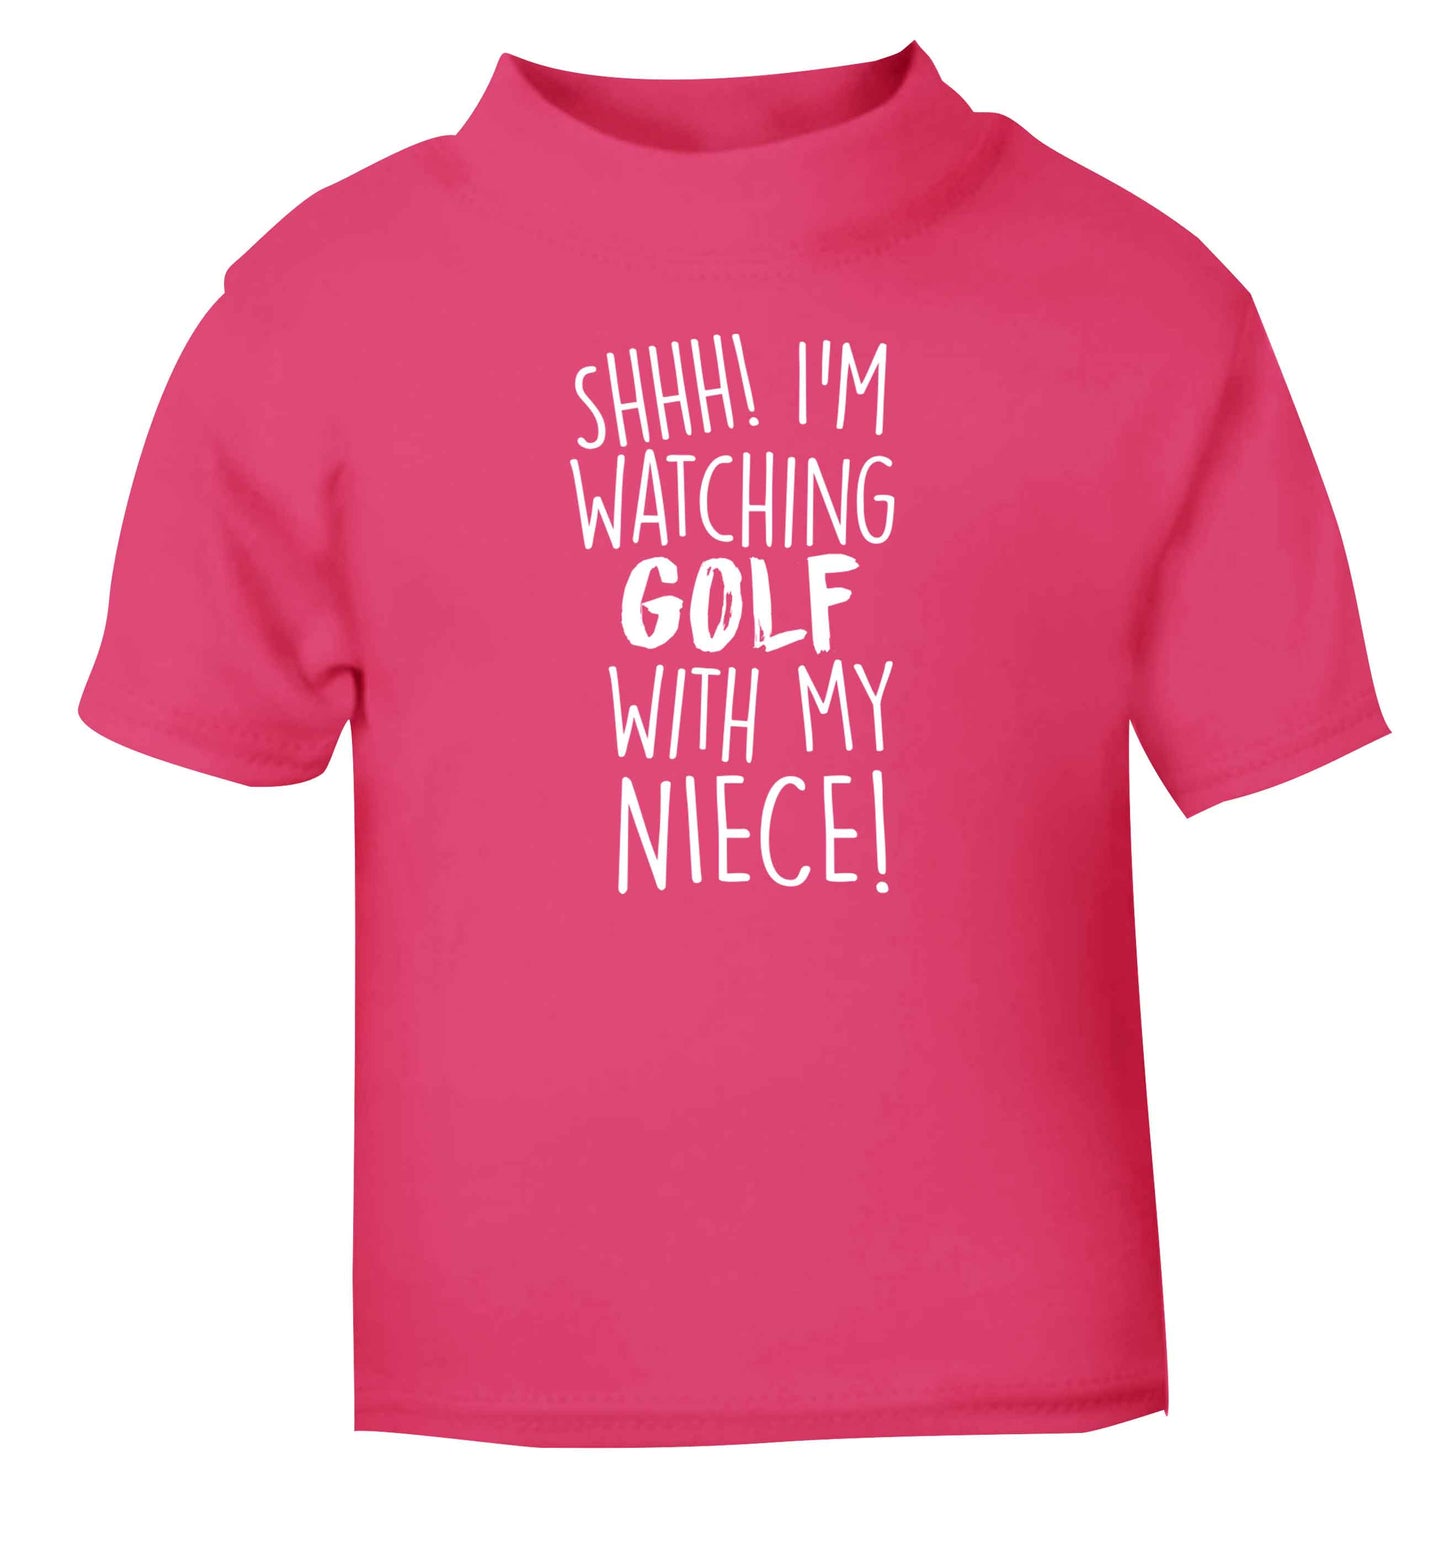 Shh I'm watching golf with my niece pink Baby Toddler Tshirt 2 Years